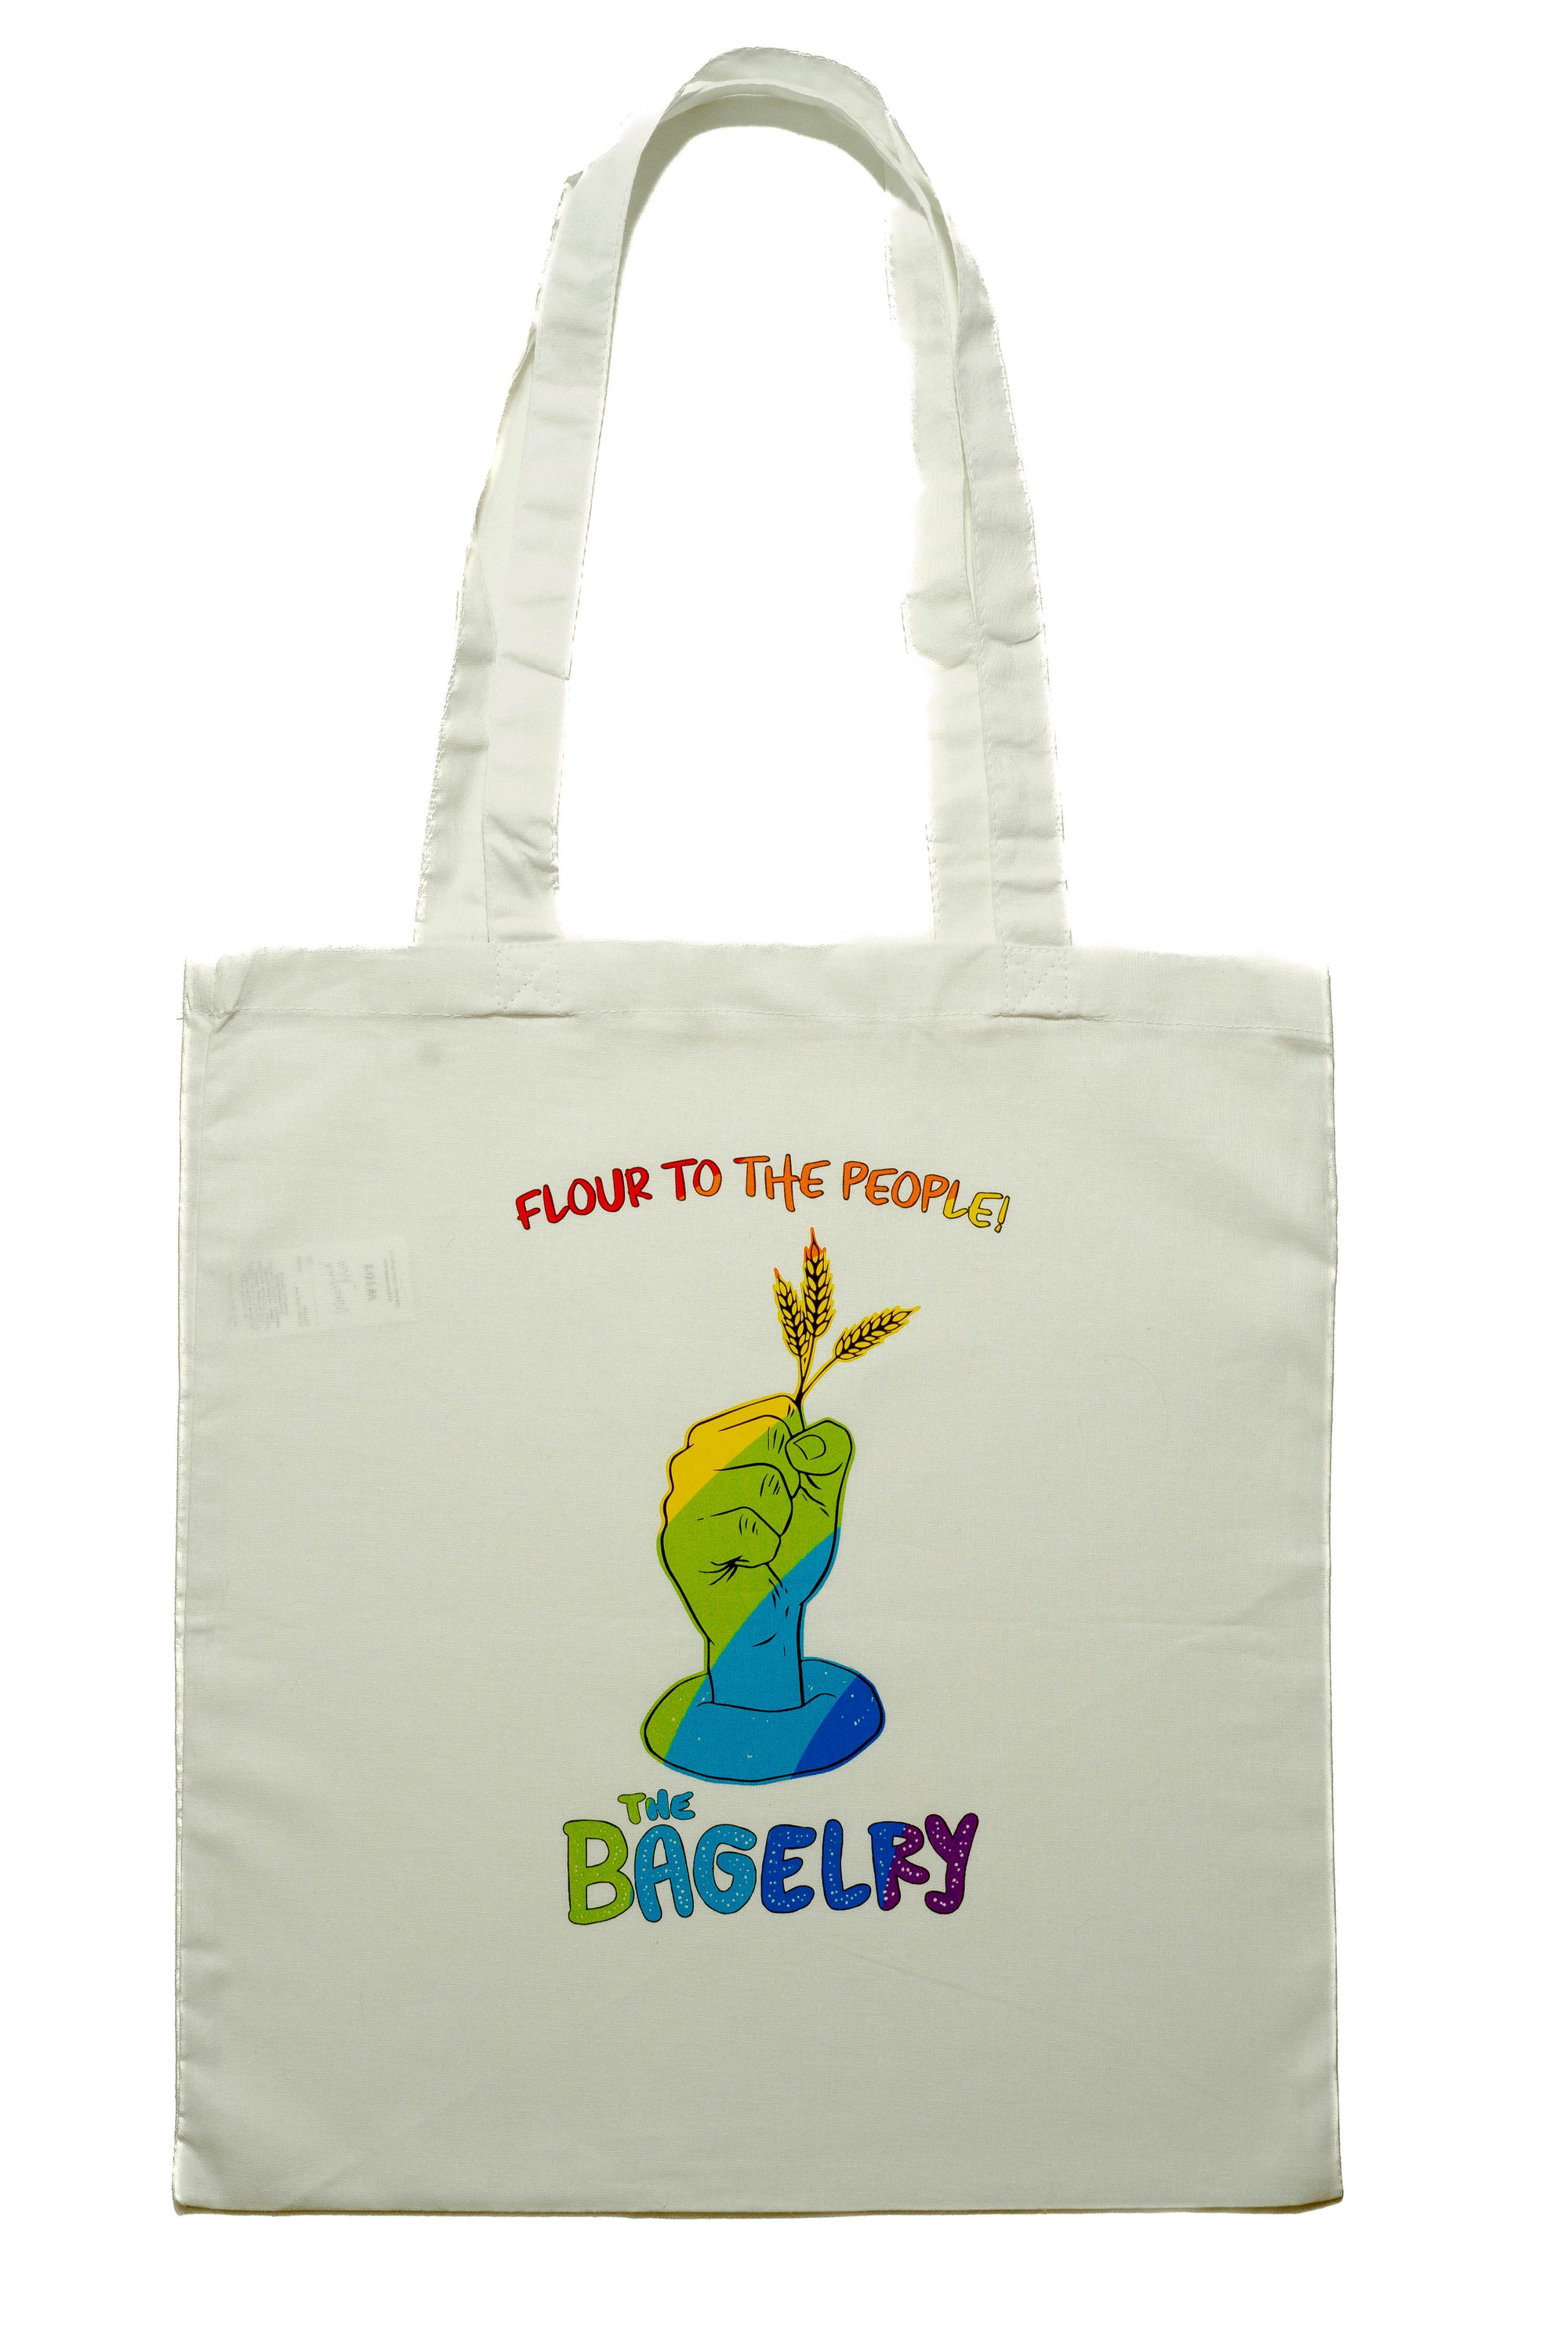 Merch – The Bagelry Liverpool